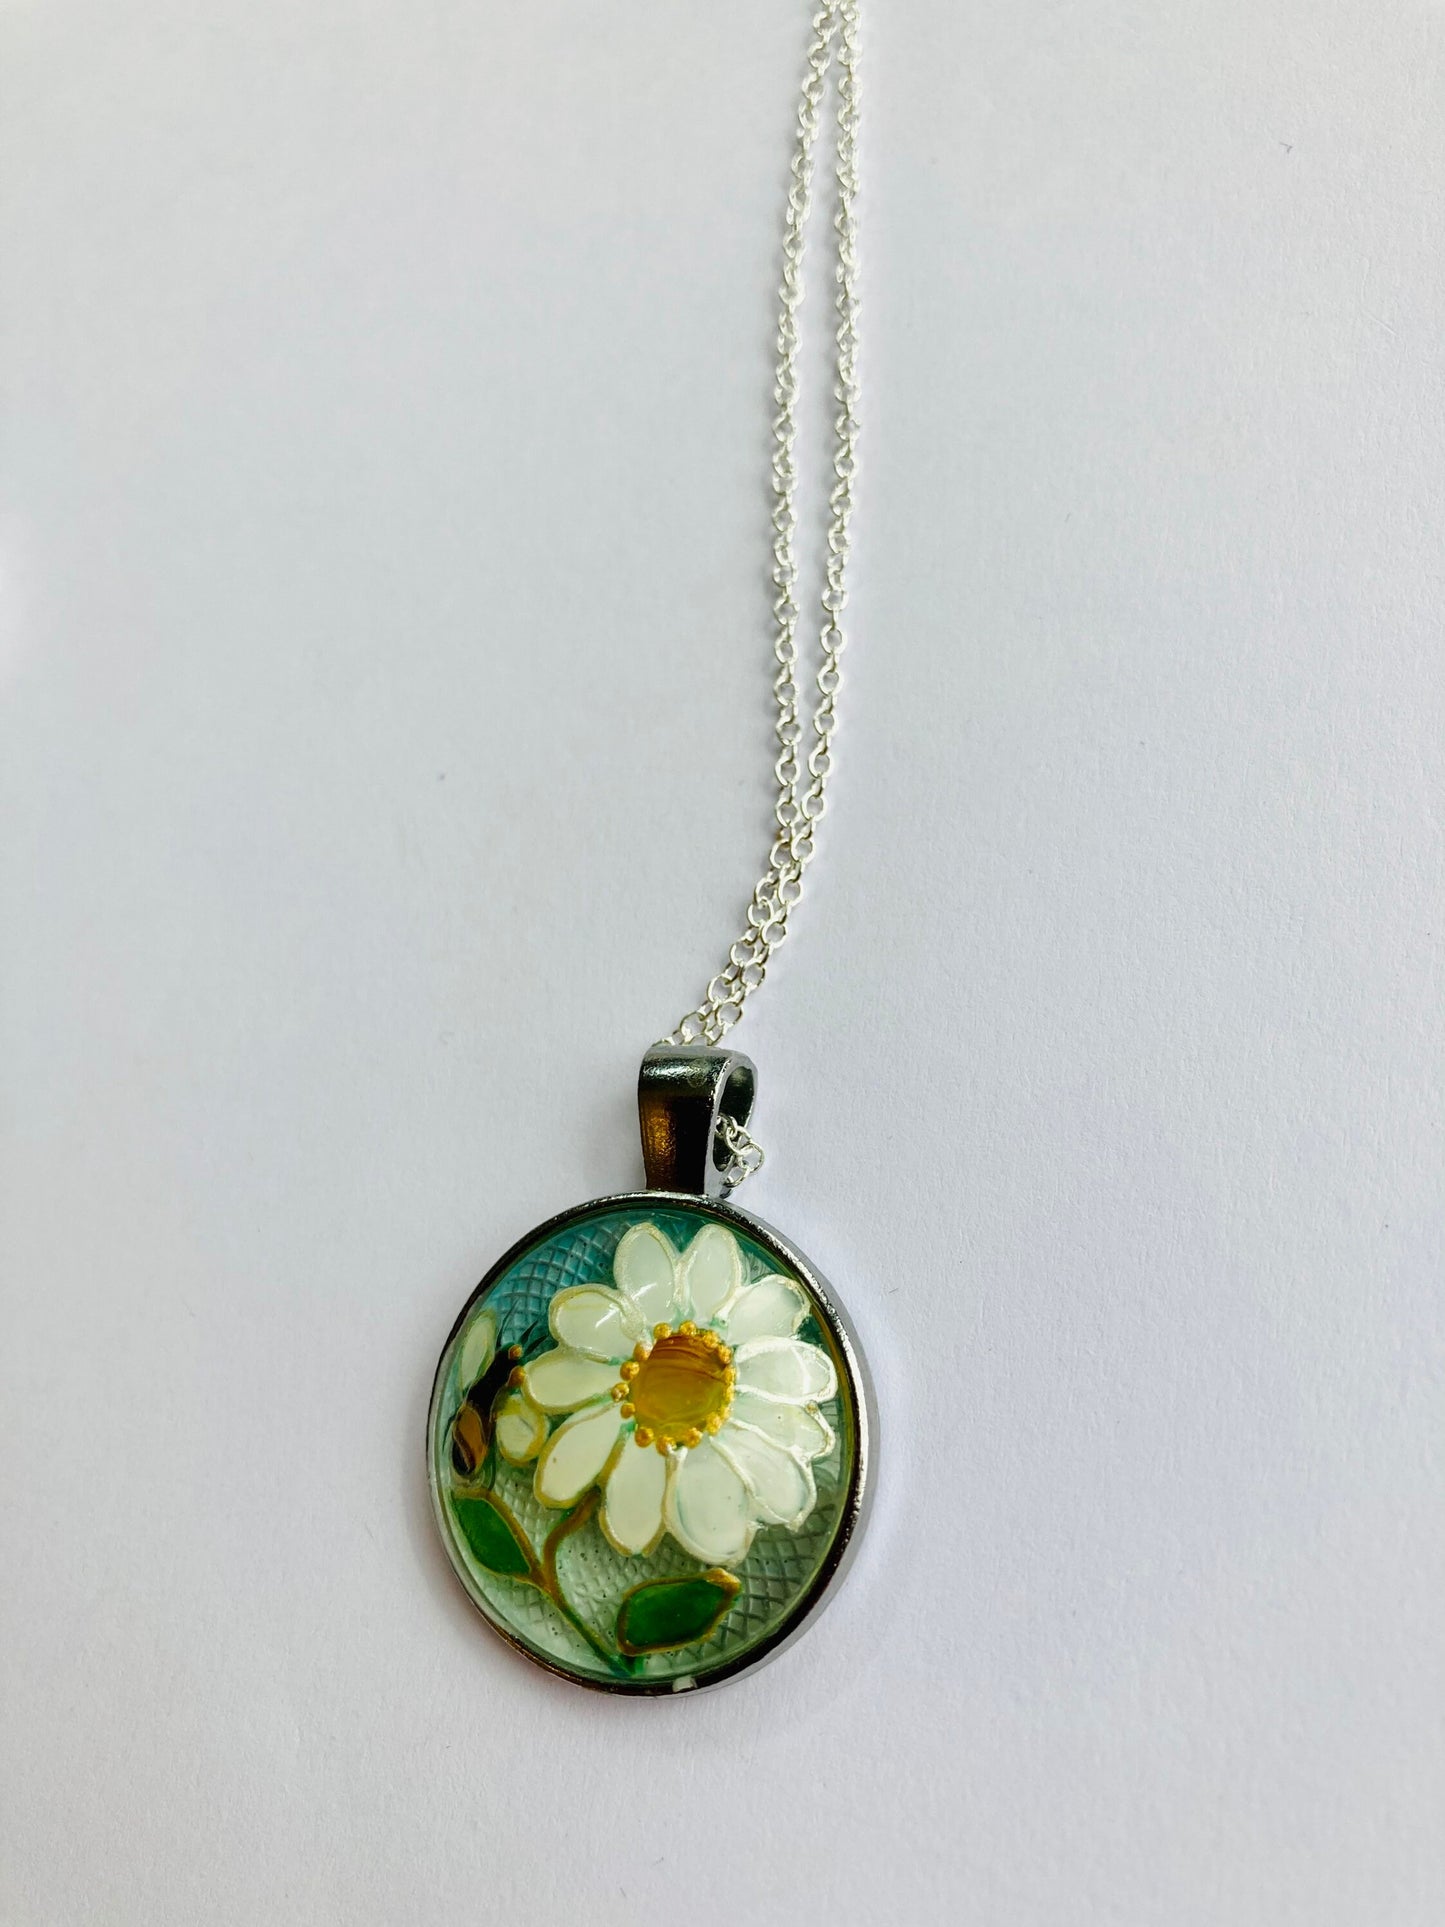 Daisy and Bee design hand painted glass pendant necklace